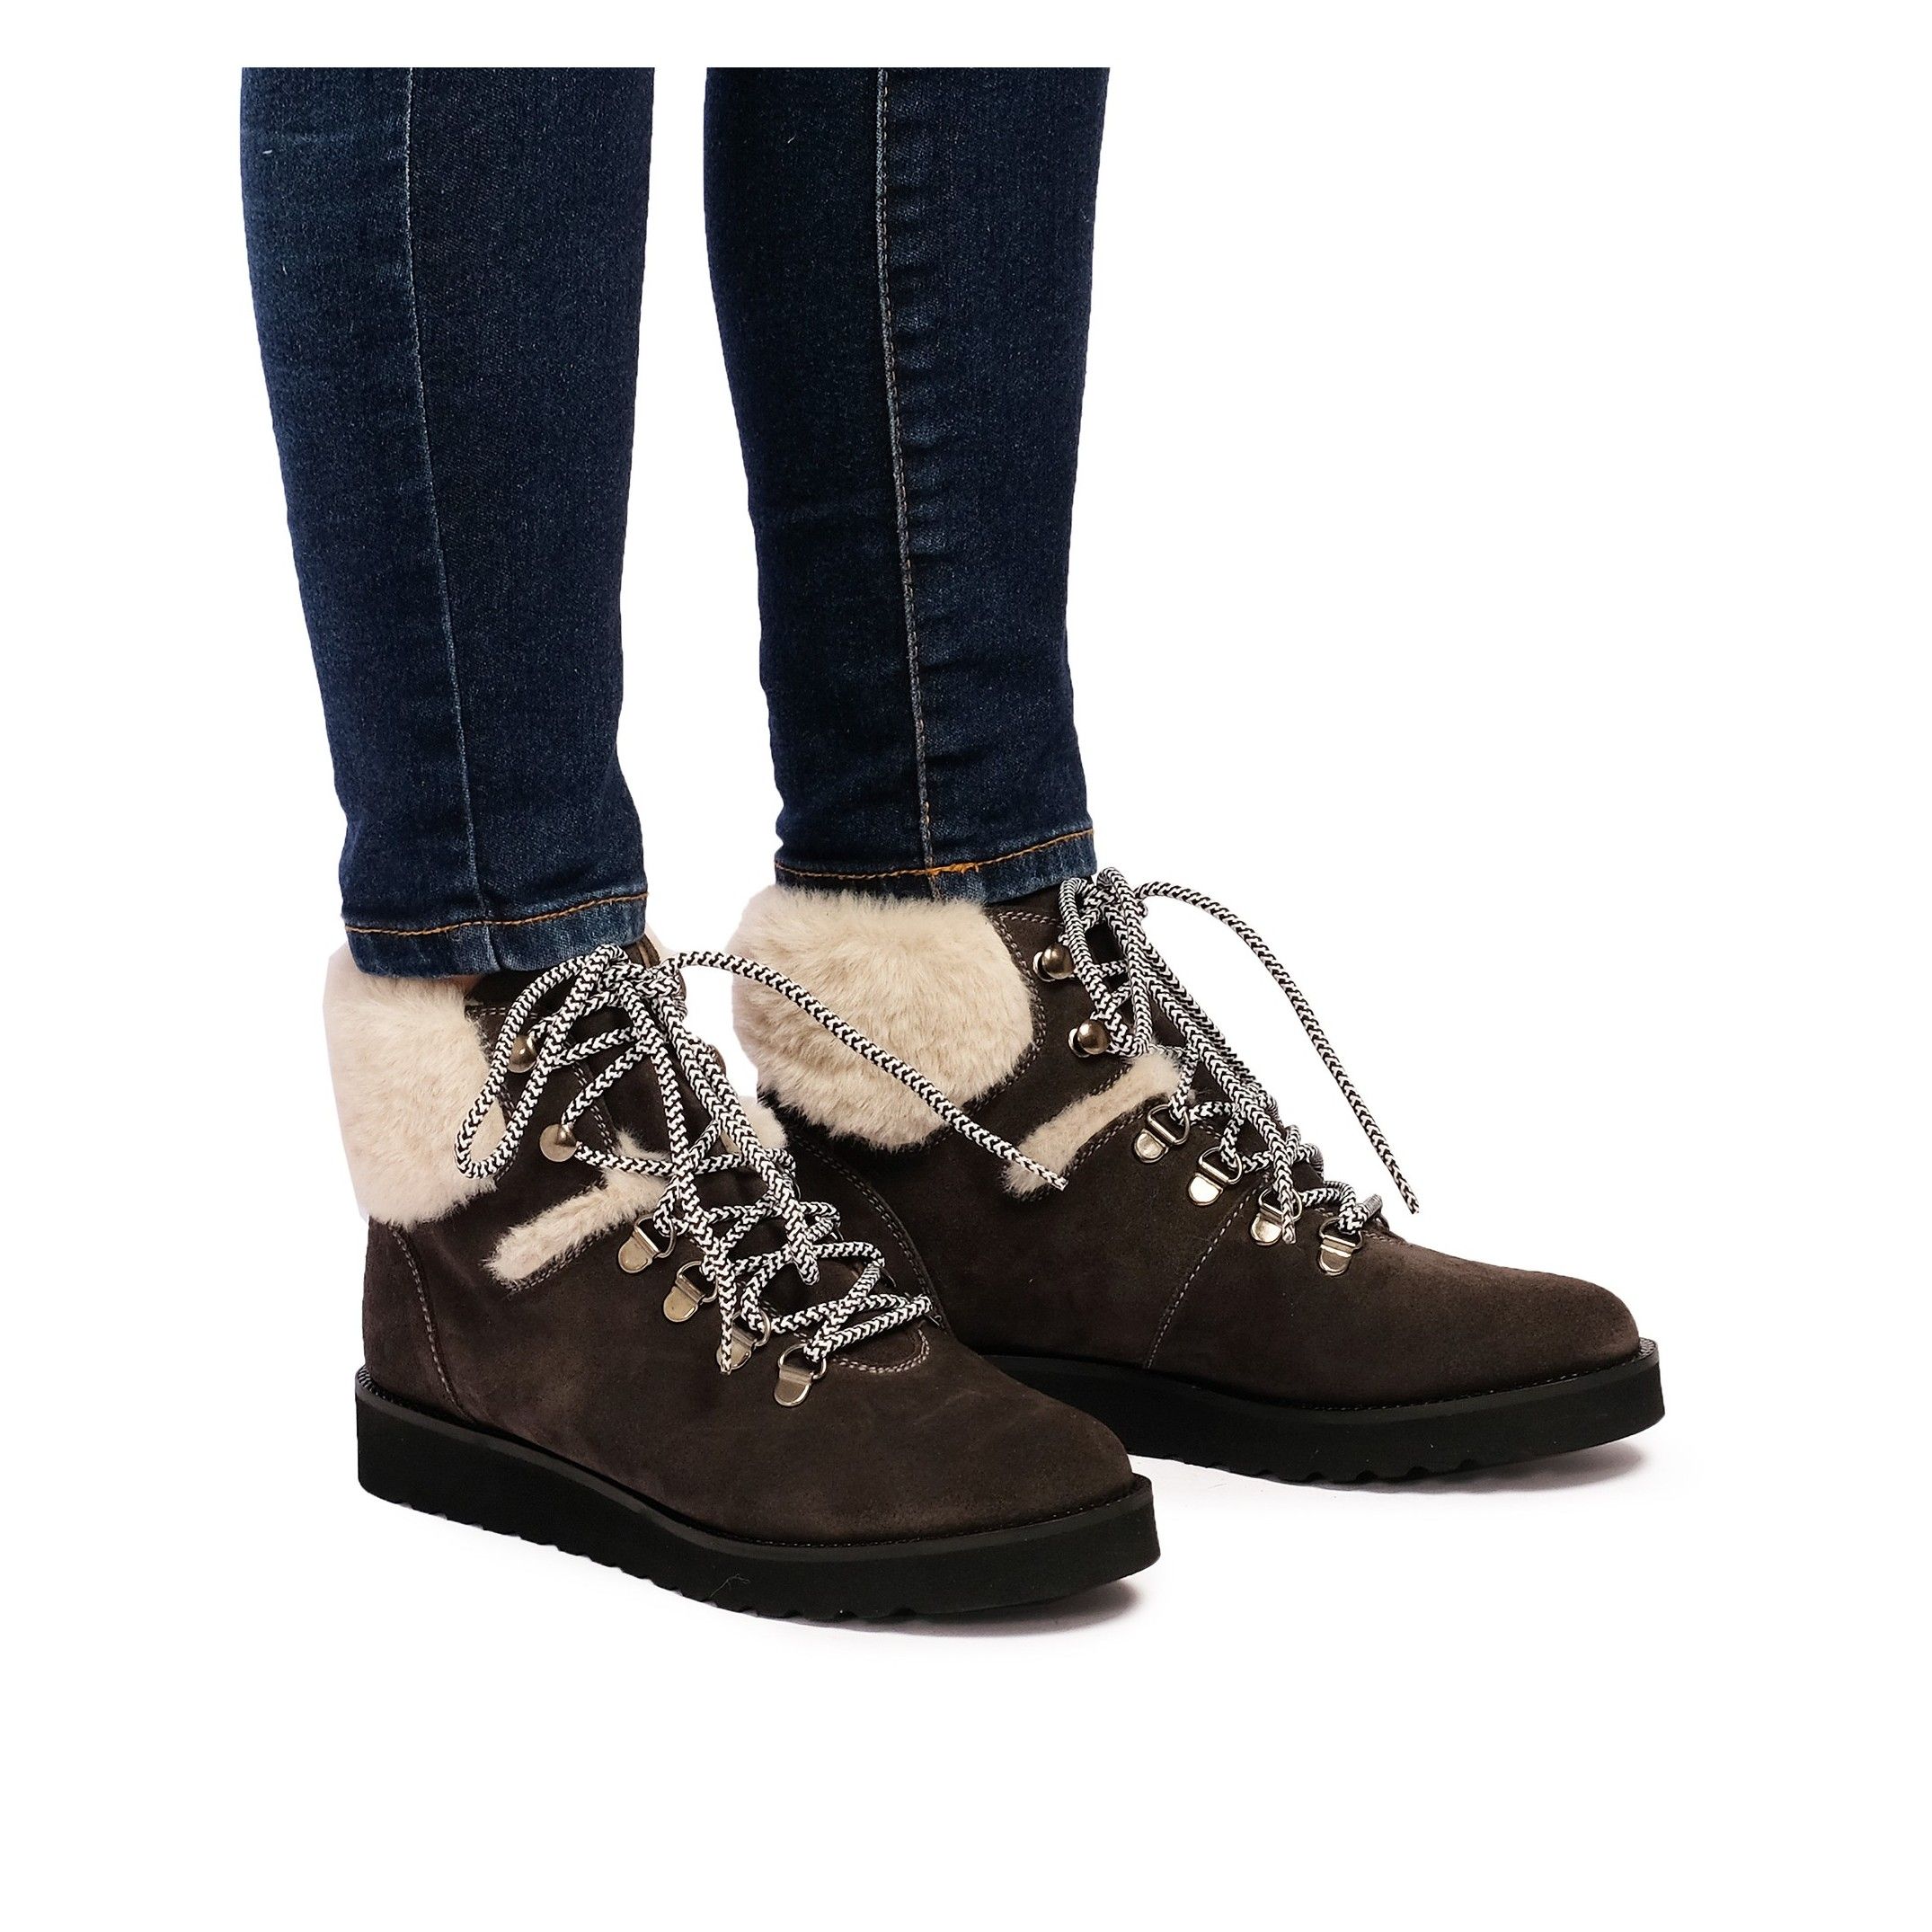 Trekking boots for women. Laces closure. Upper, inner and insole made of leather. Platform: 2 cm. Wedge: 2,5 cm. Rubber sole. Made in Spain.